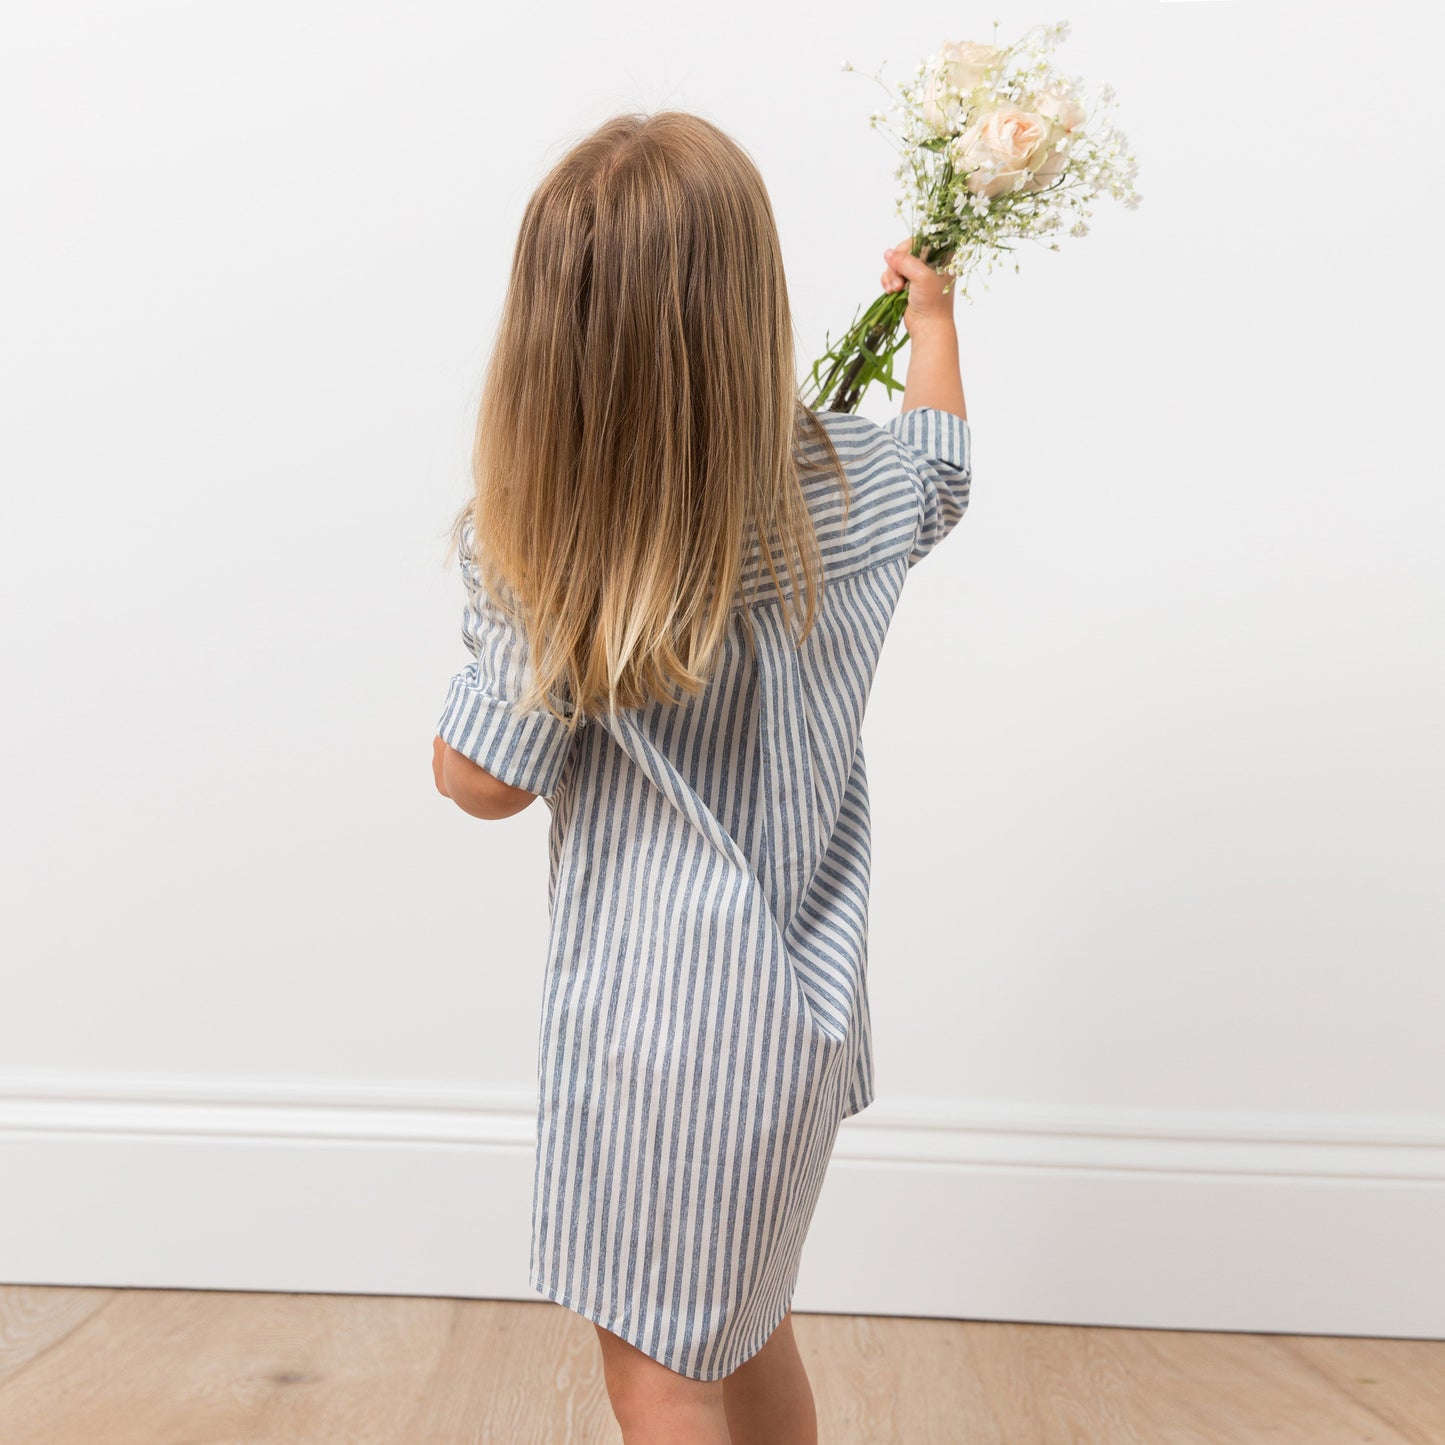 
                  
                    Girl wearing striped shirt dress with flowers
                  
                